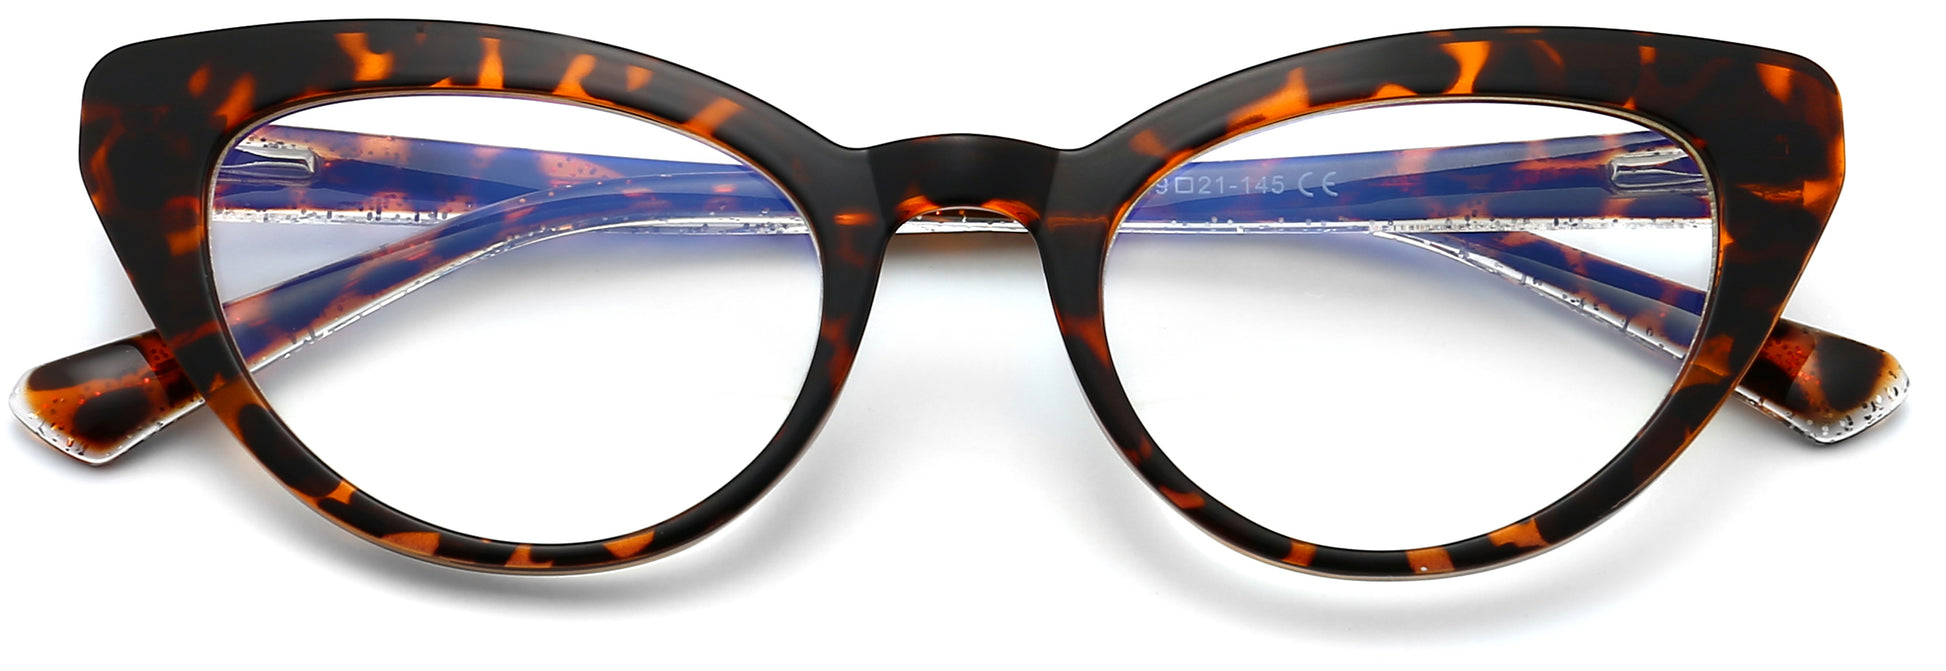 Airlie Cateye Tortoise Eyeglasses from ANRRI, closed view